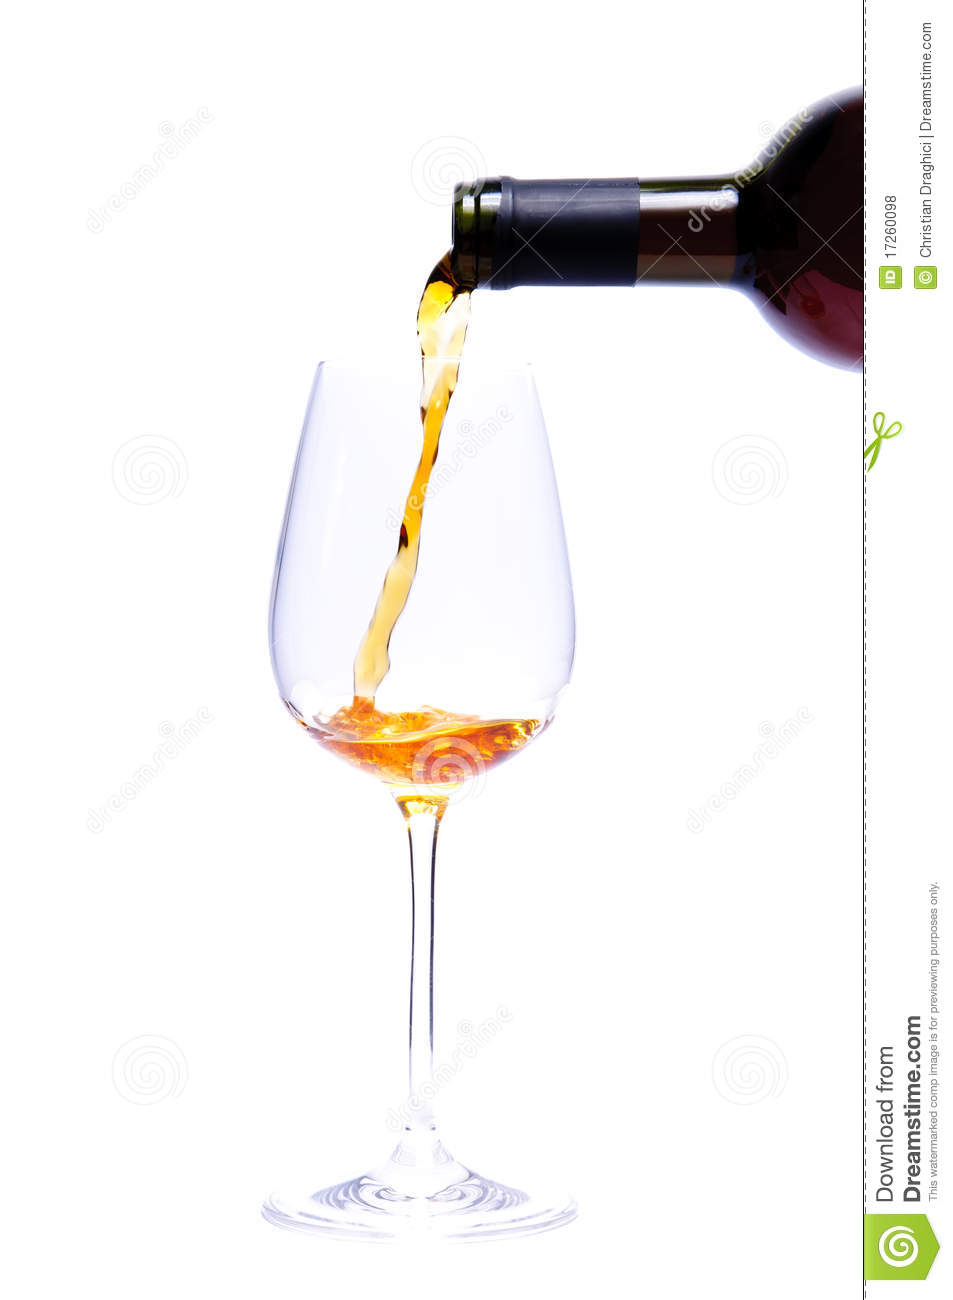 Pouring Wine With Glass And Bottle Isolated On A White Background